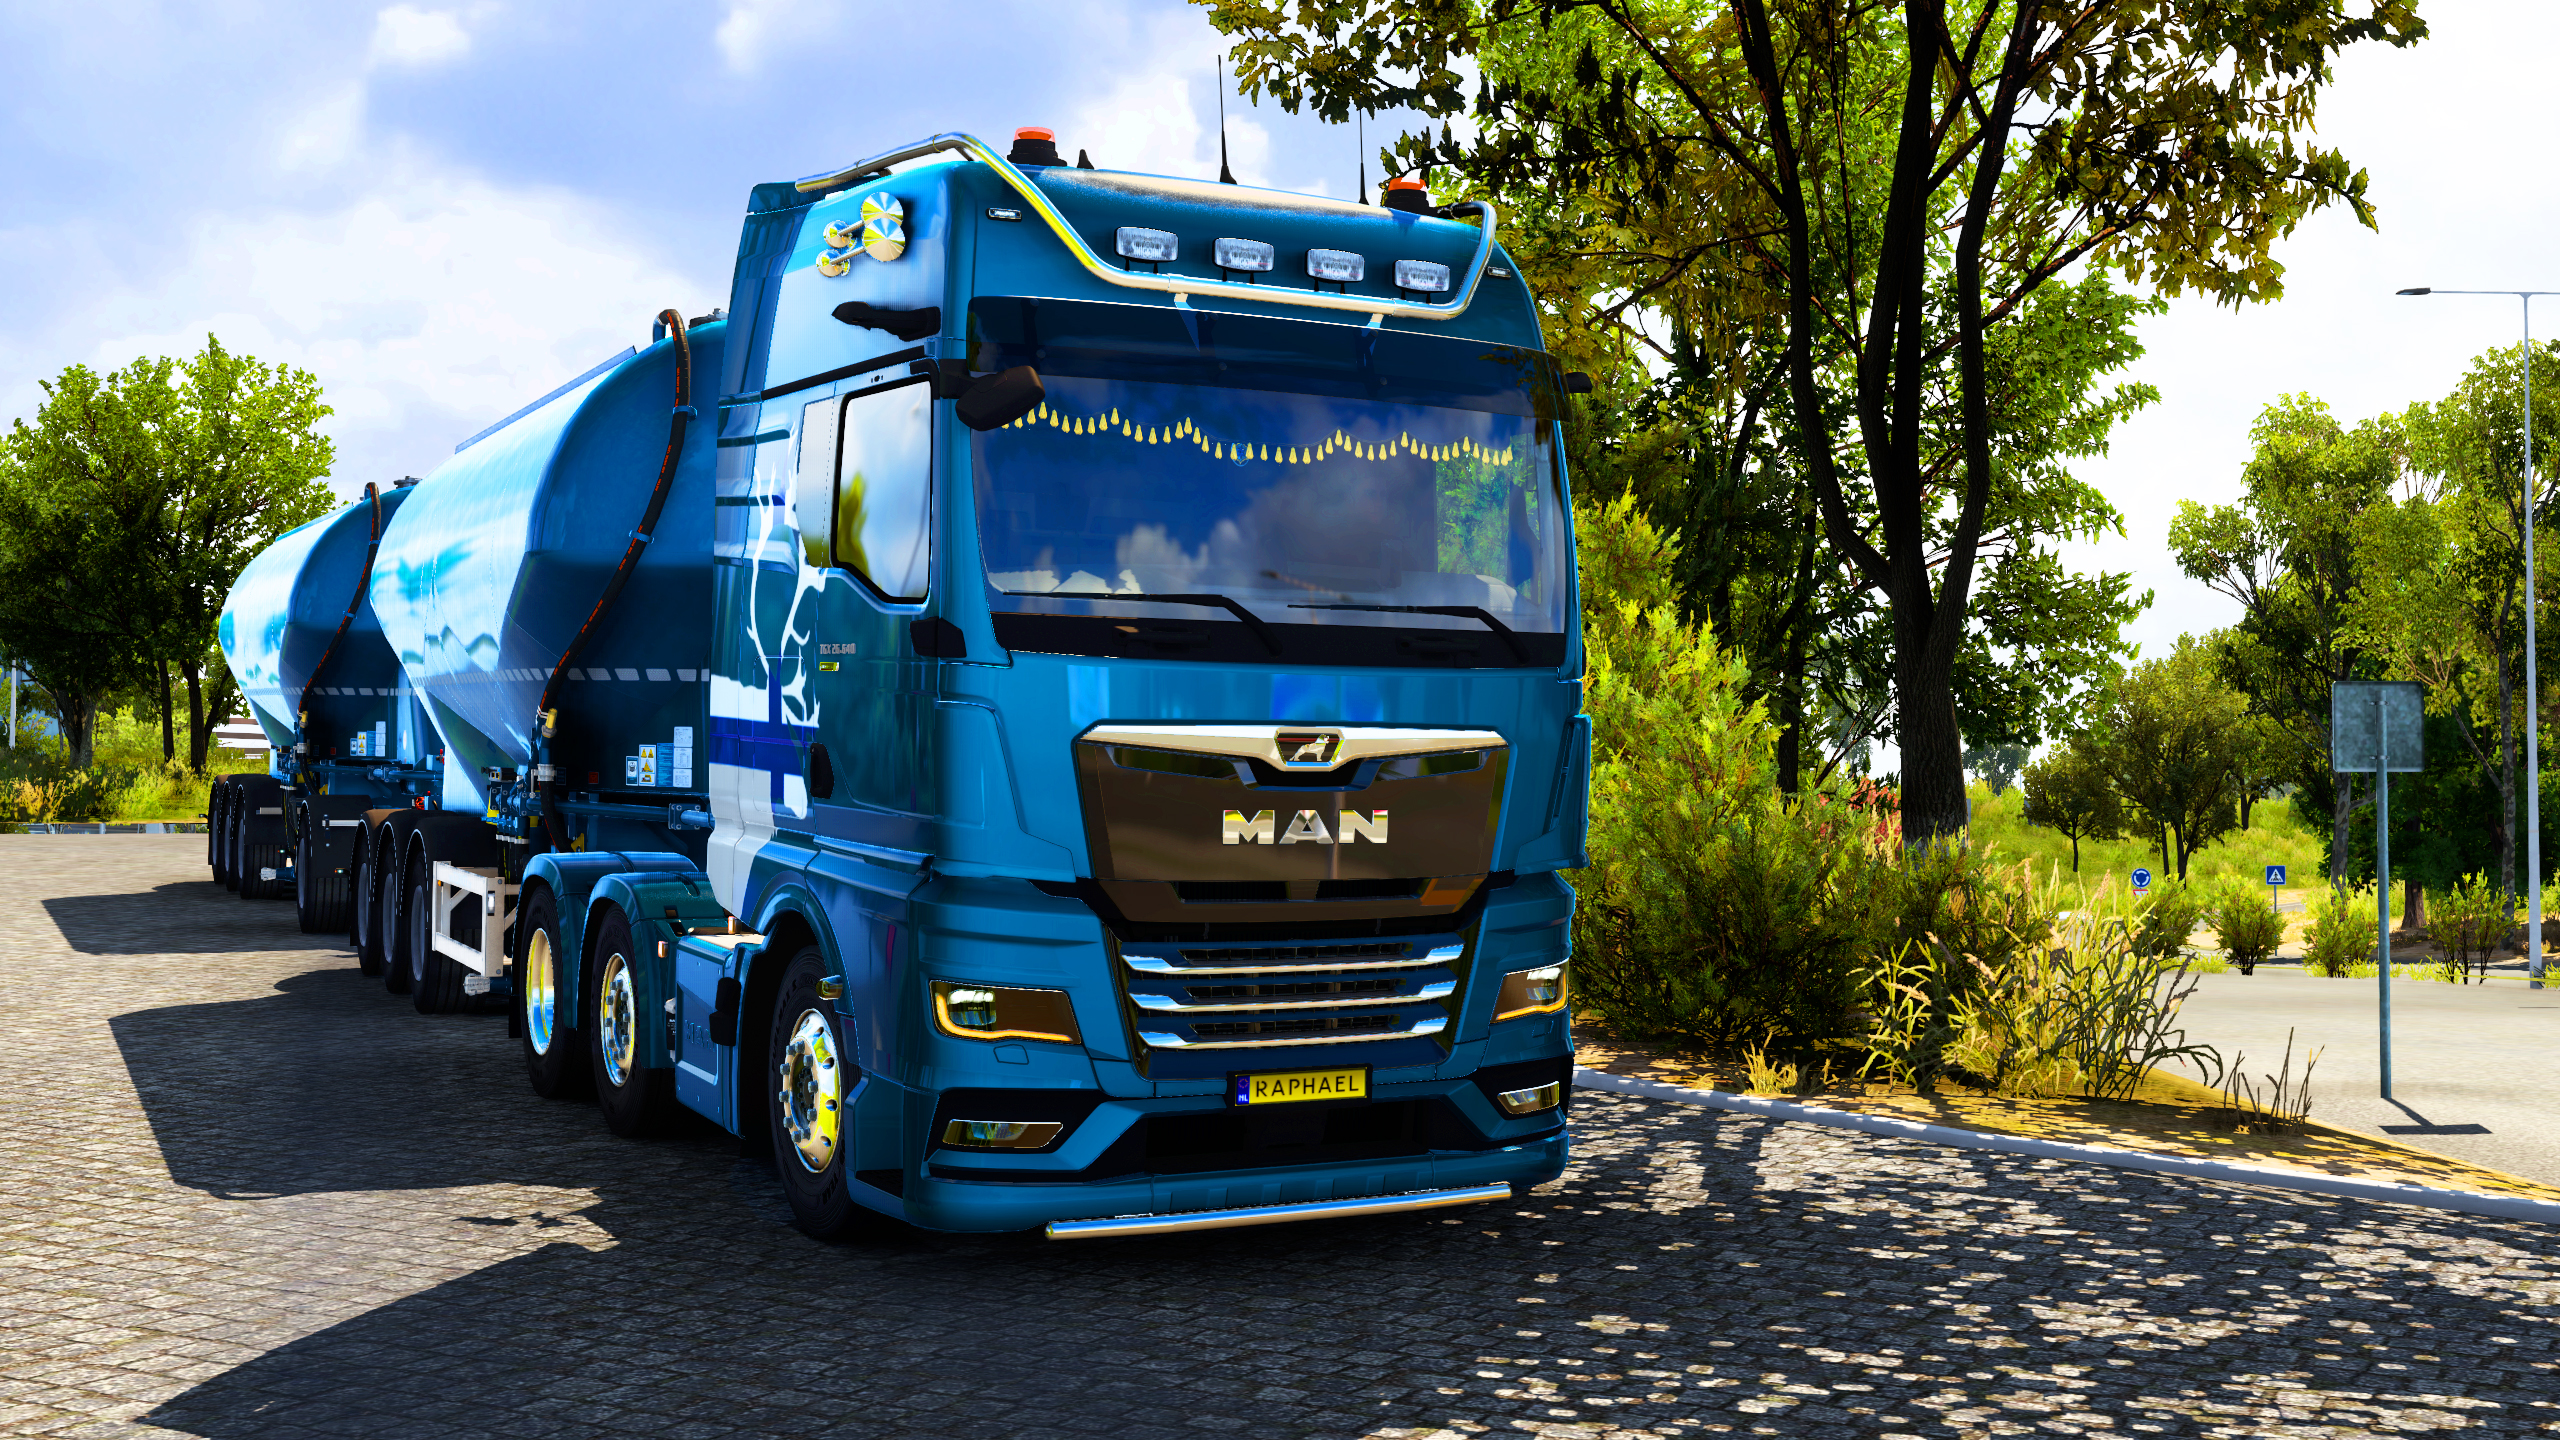 General 2560x1440 truck Blue Trucks finnish MAN (Company) vehicle clouds sky trees frontal view video games